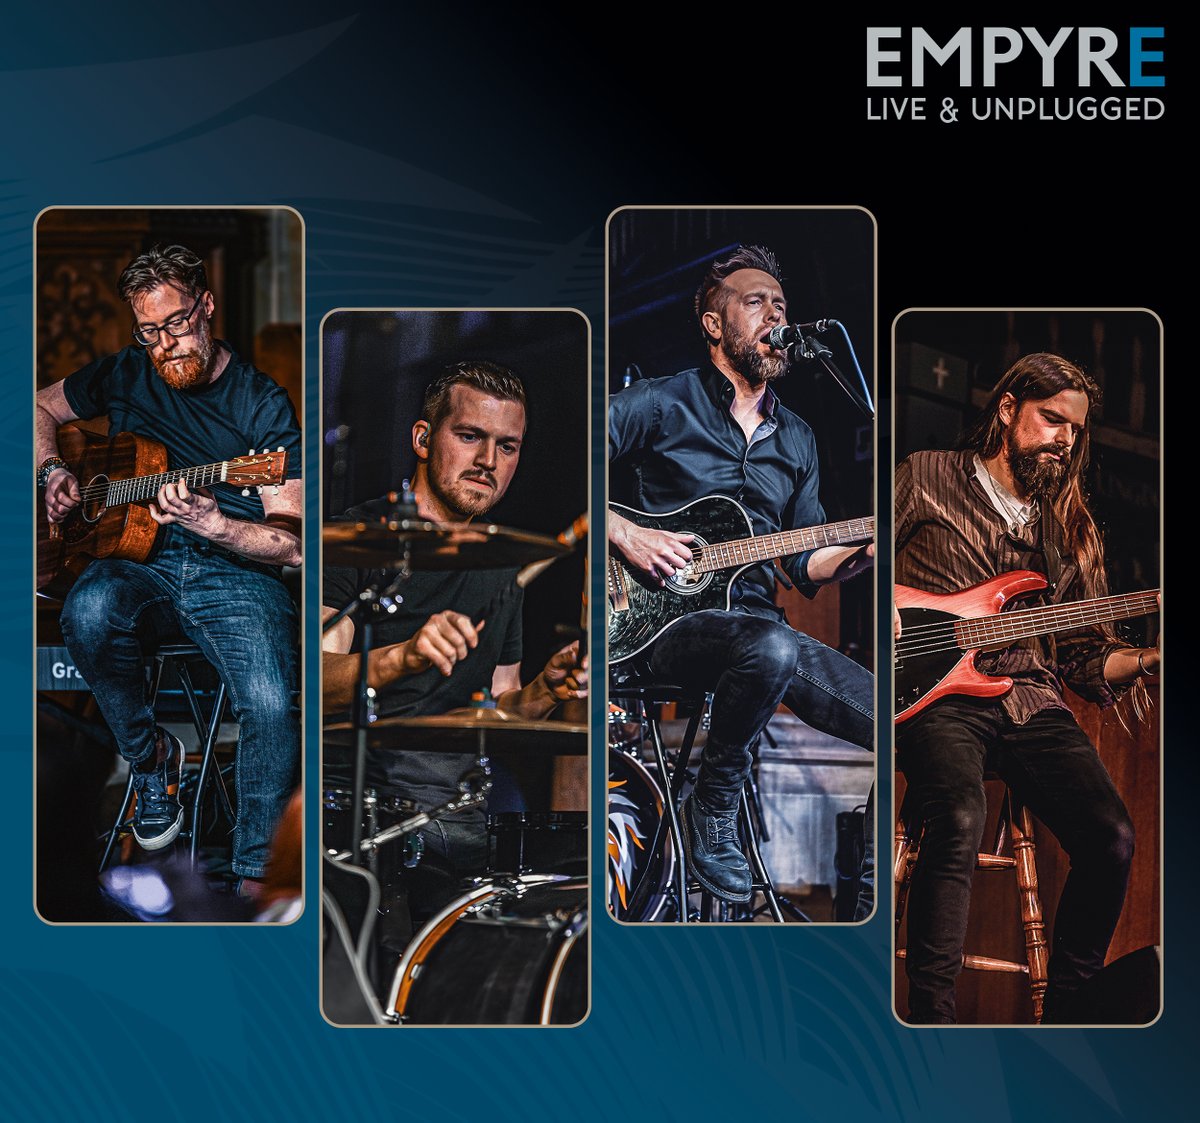 𝗡𝗘𝗪 𝗔𝗟𝗕𝗨𝗠 𝗣𝗿𝗲-𝗼𝗿𝗱𝗲𝗿 𝗶𝘀 𝗼𝗽𝗲𝗻!
We will release our new album 'Live & Unplugged' on May 17th and you can pre-order it now, only at: empyre.co.uk/preorder

#newalbum #empyre #liveandunplugged #rock #acoustic #unplugged #PreOrder #preordernow